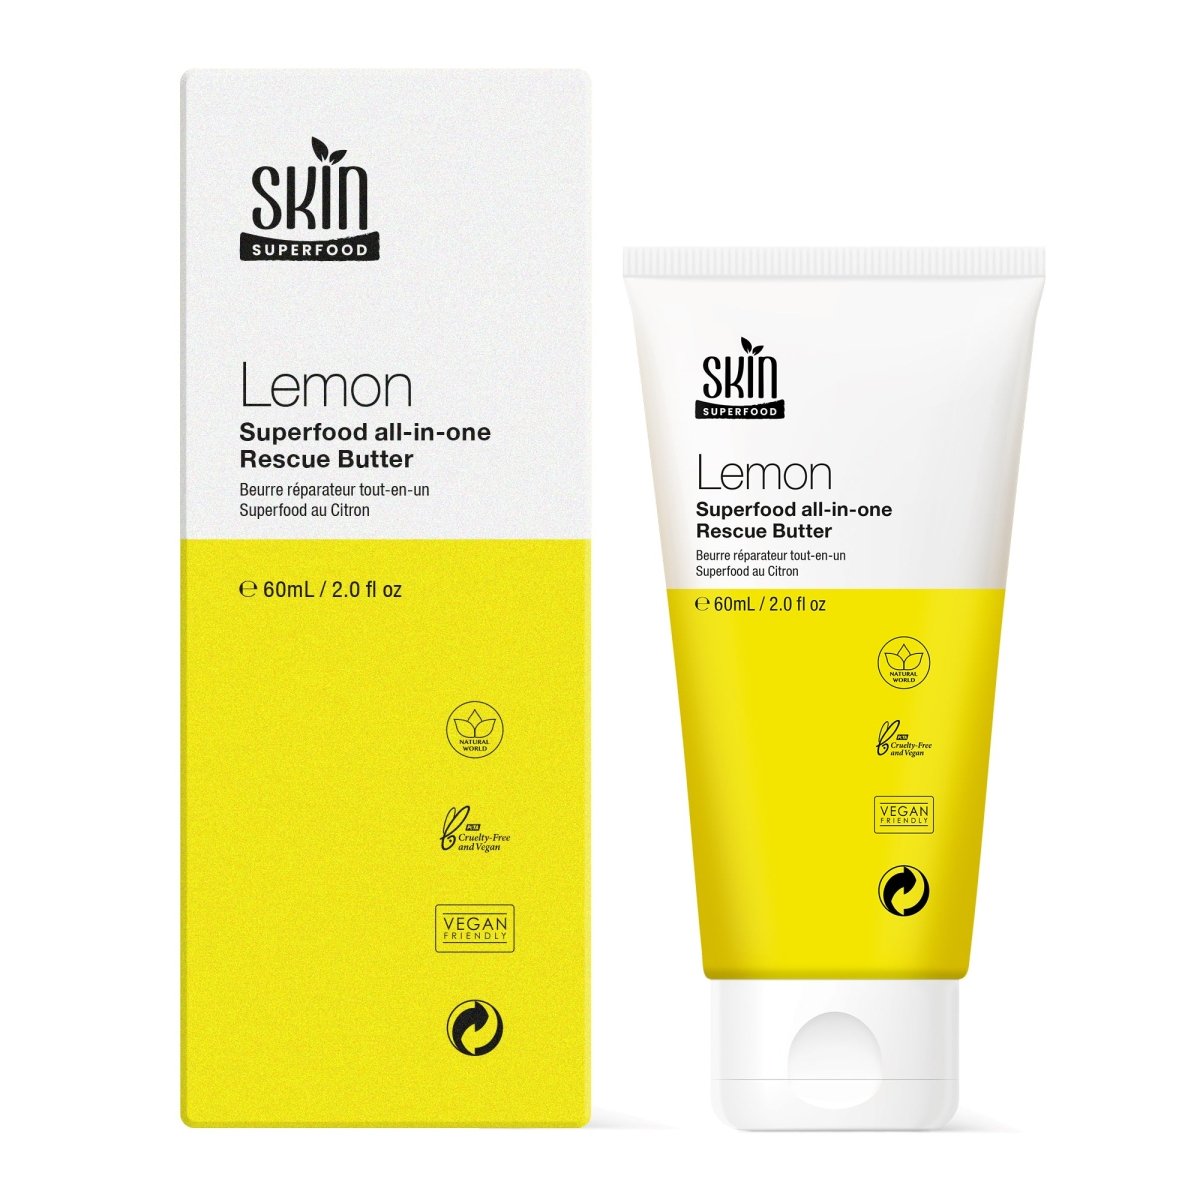 SF Lemon Superfood Rescue butter 60ml - skinChemists